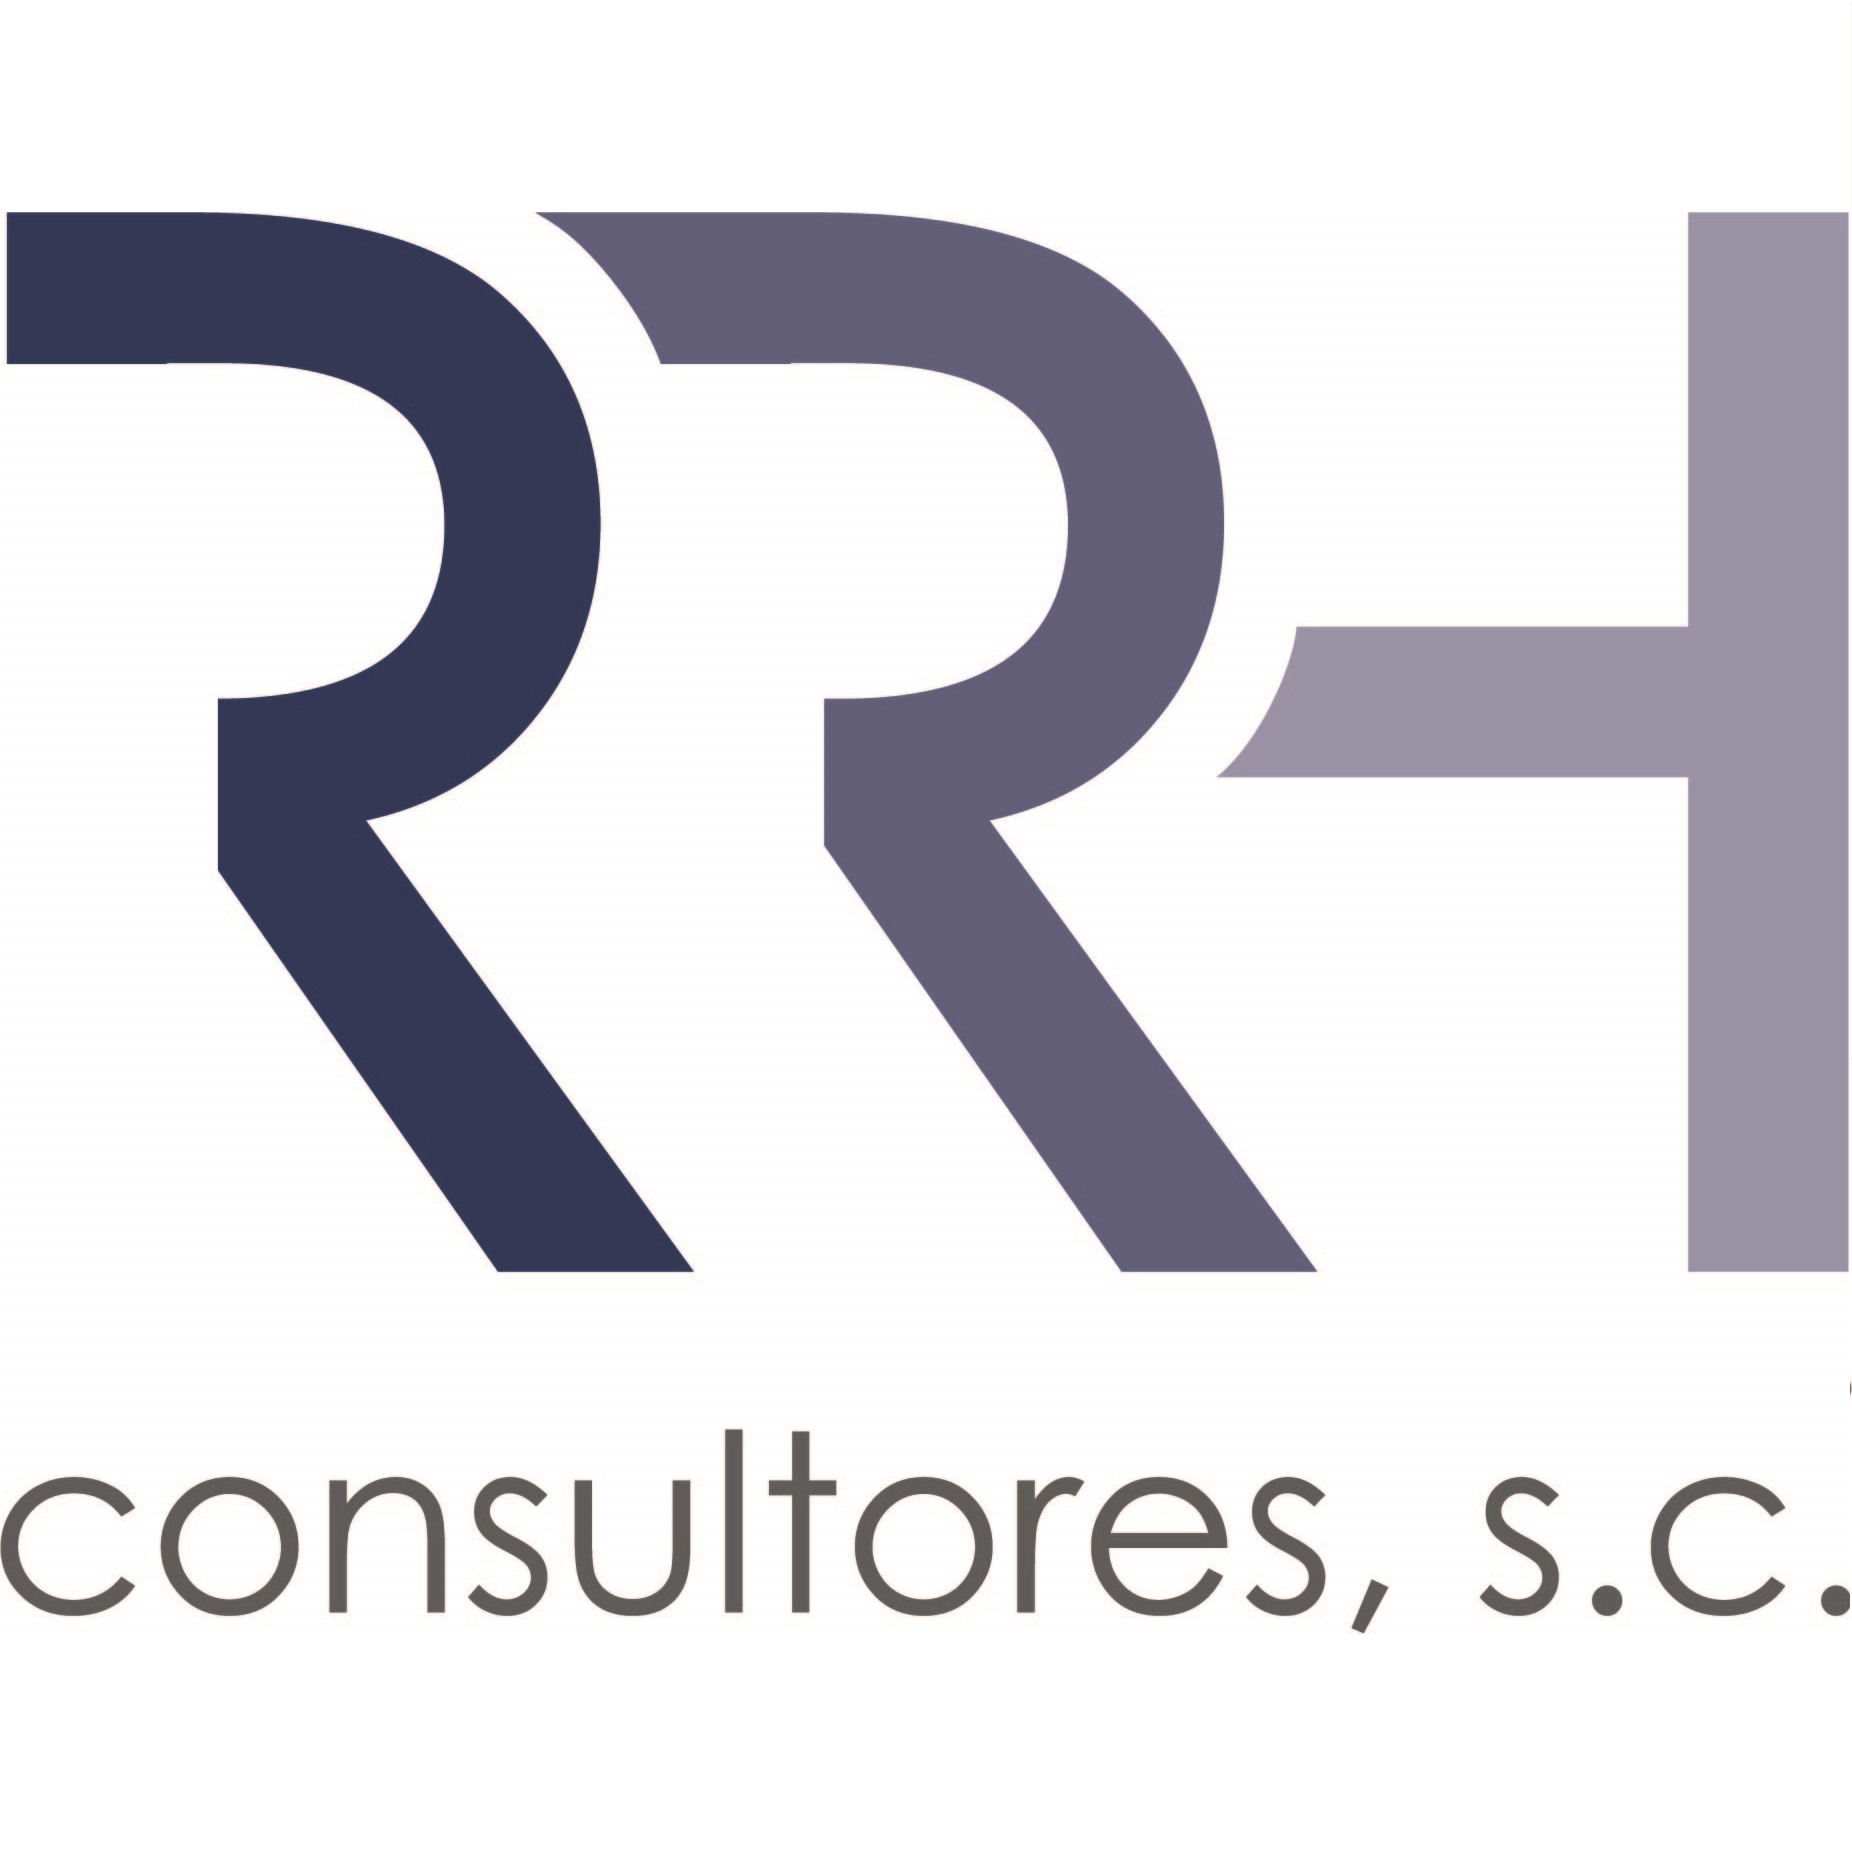 Welcome New Member: RRH Consultores